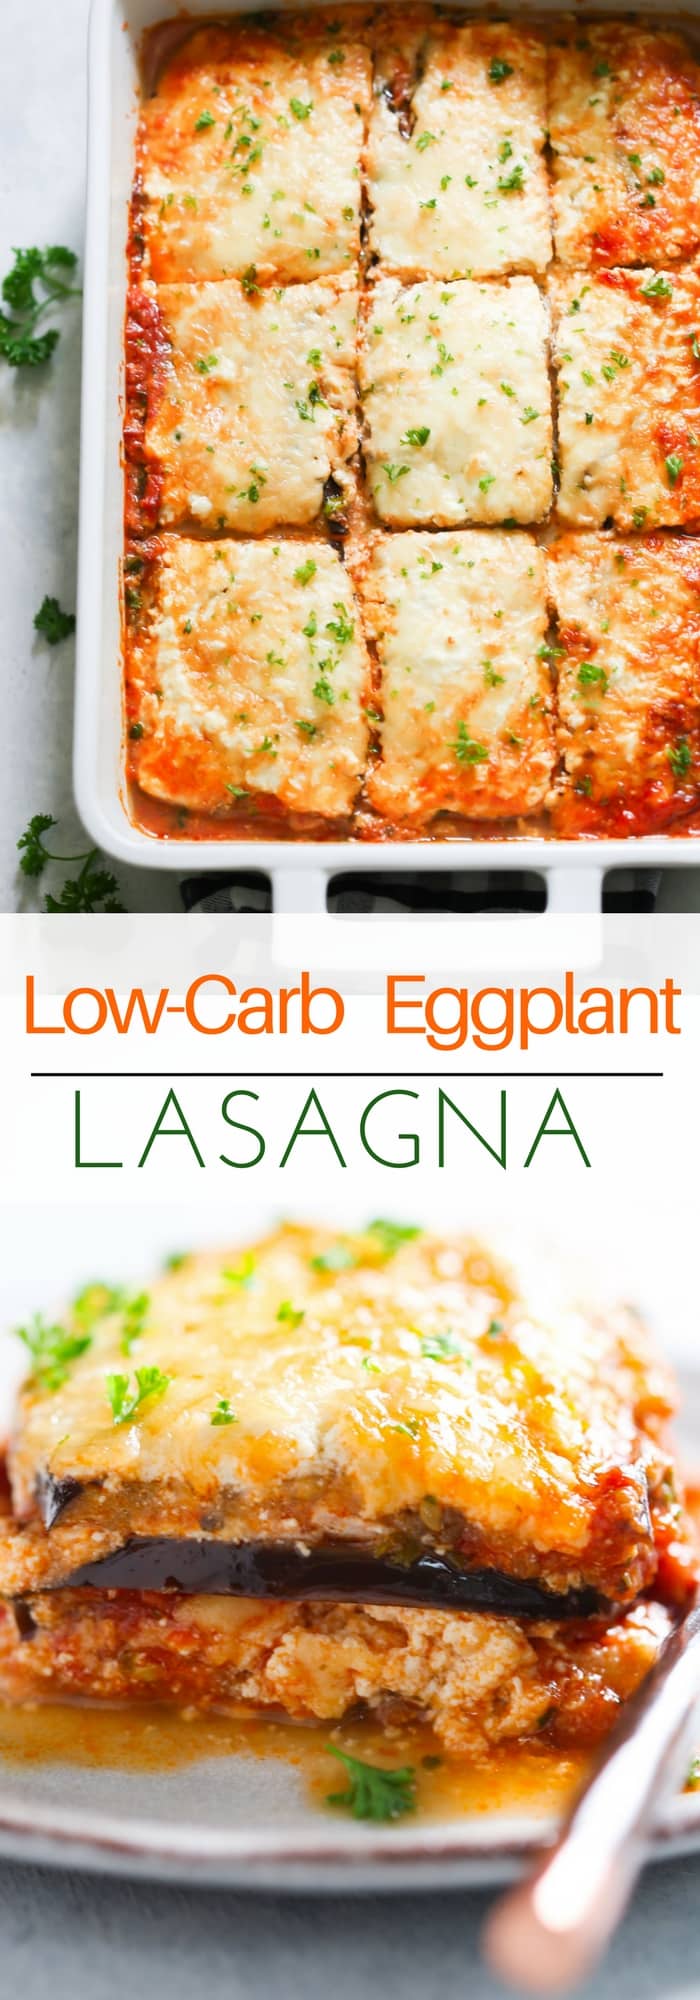 Low-Carb Eggplant Lasagna - This Low-Carb Eggplant Lasagna recipe is made with eggplant slices, which makes it perfect for those who are following a low-carb and gluten-free diet. It's absolutely delicious too!